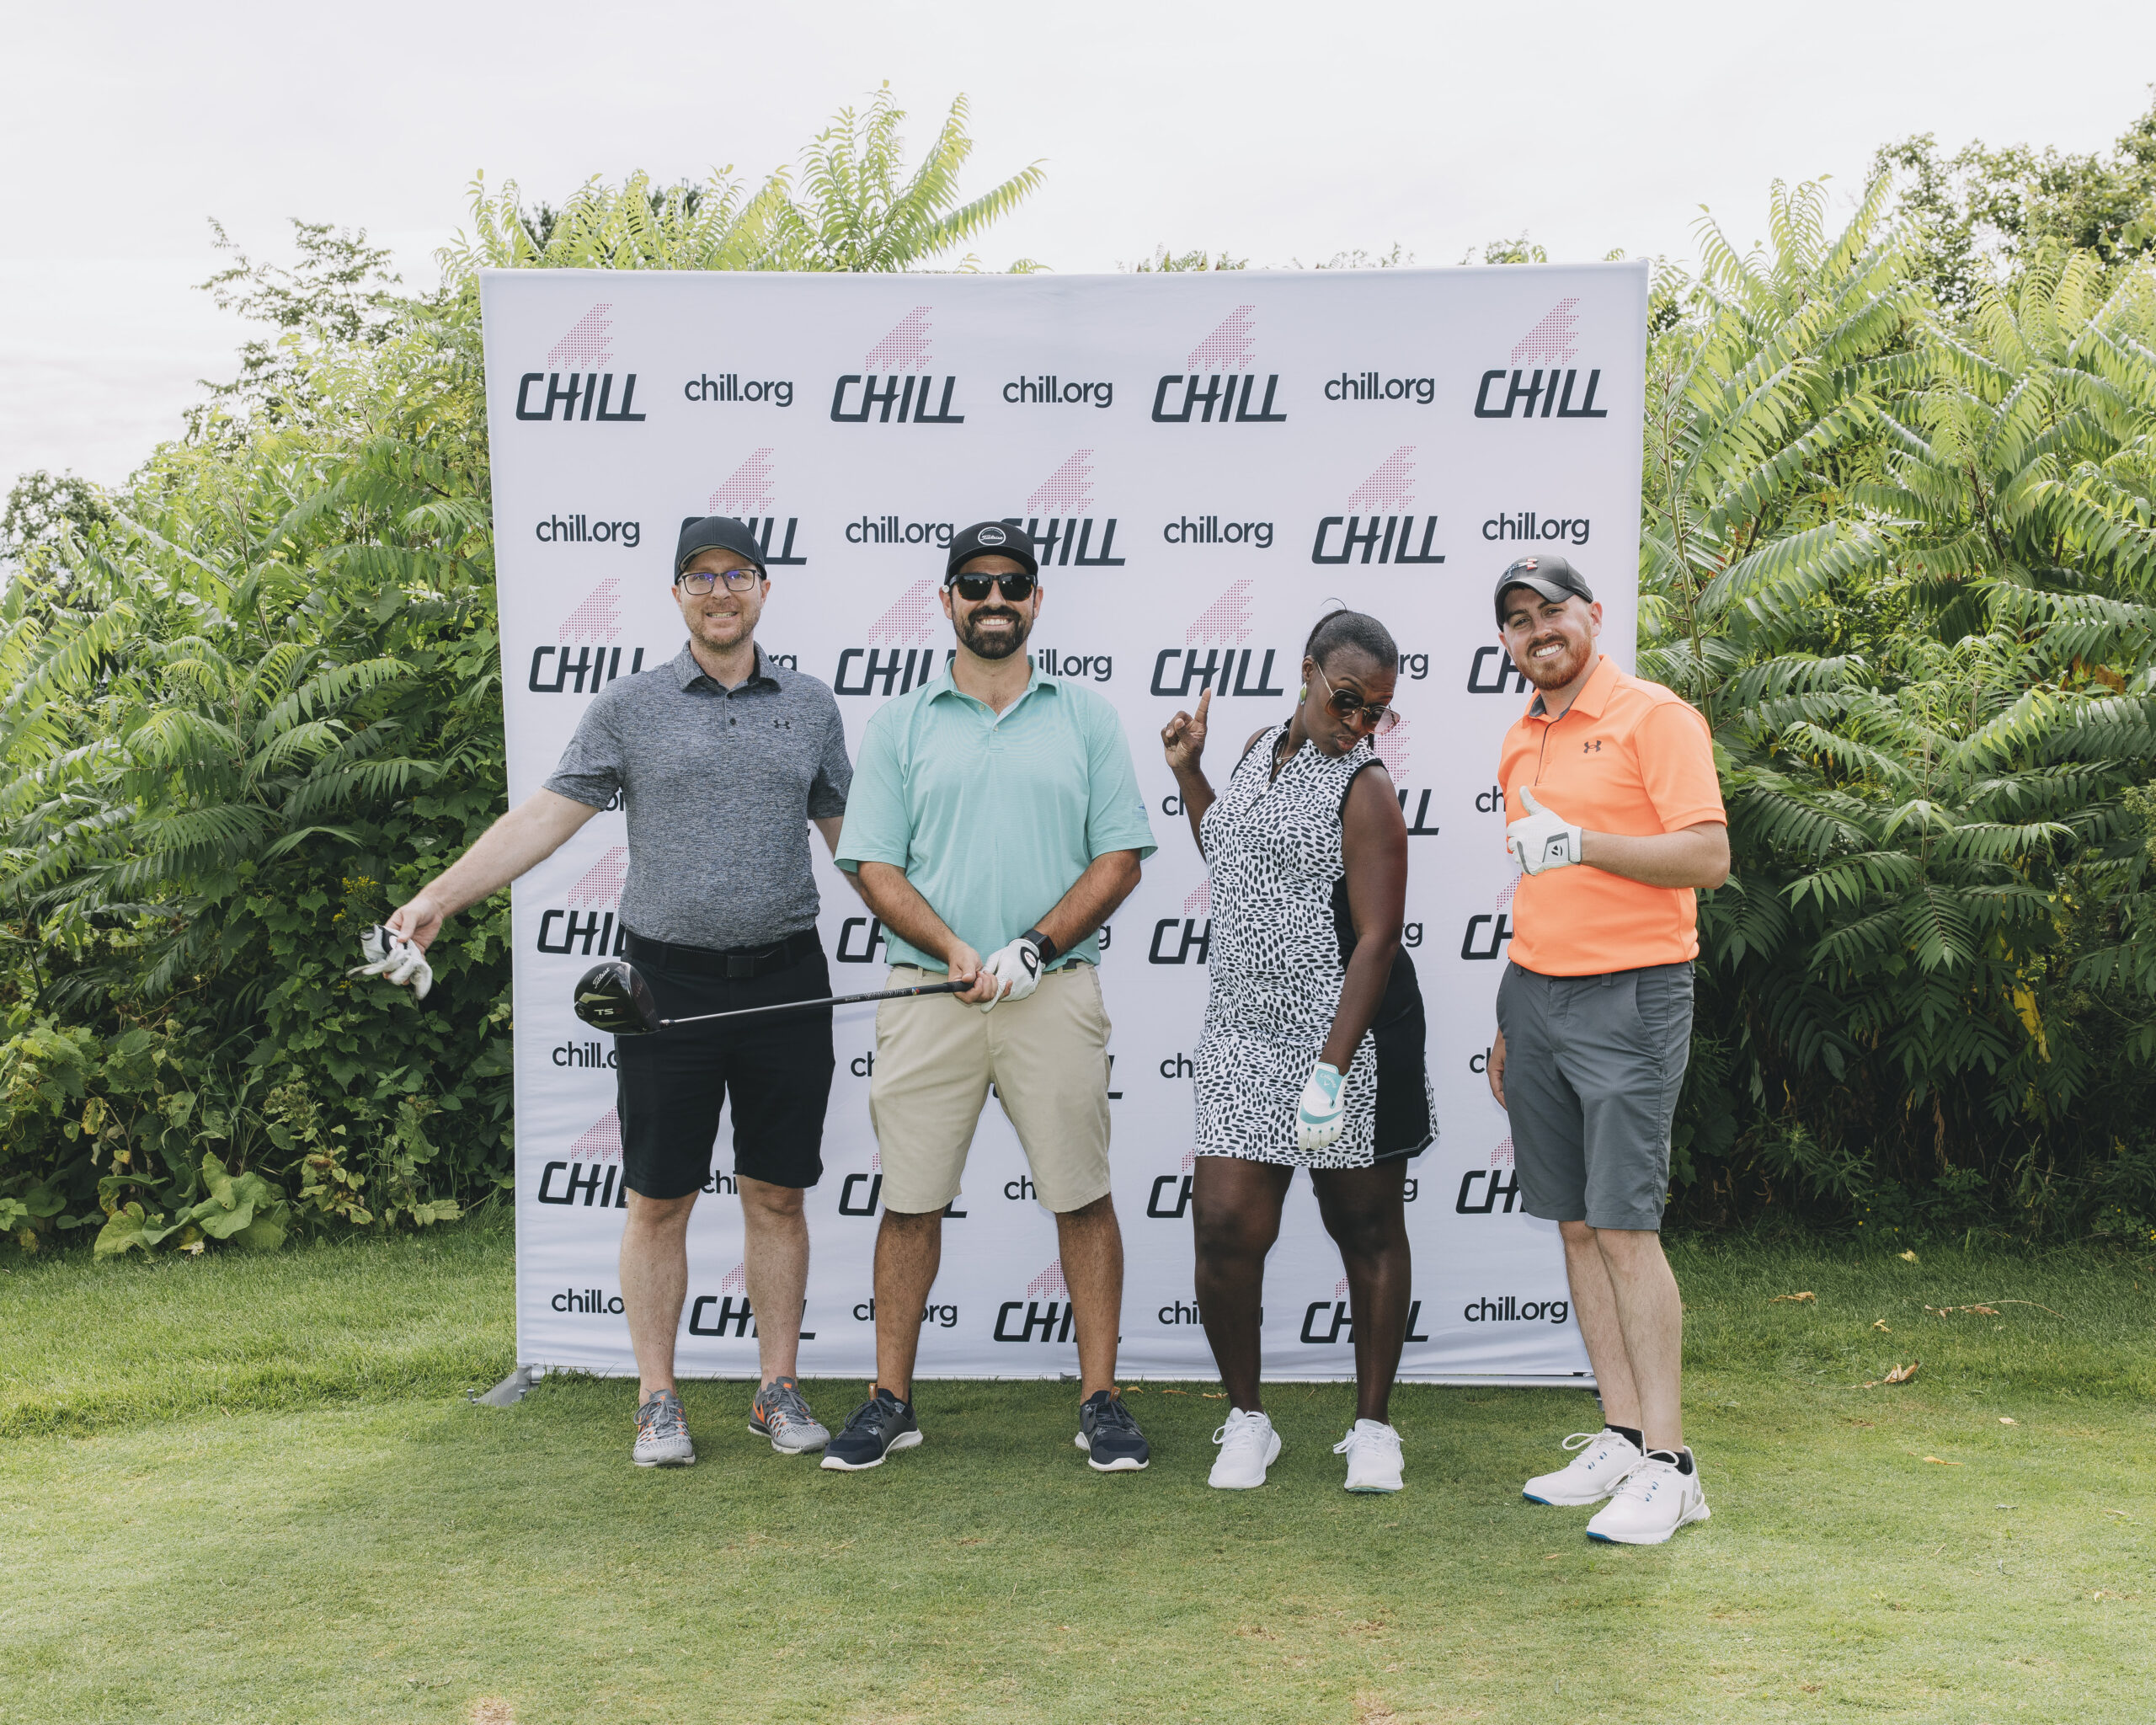 A group of people posing at a Chill golf tournament.